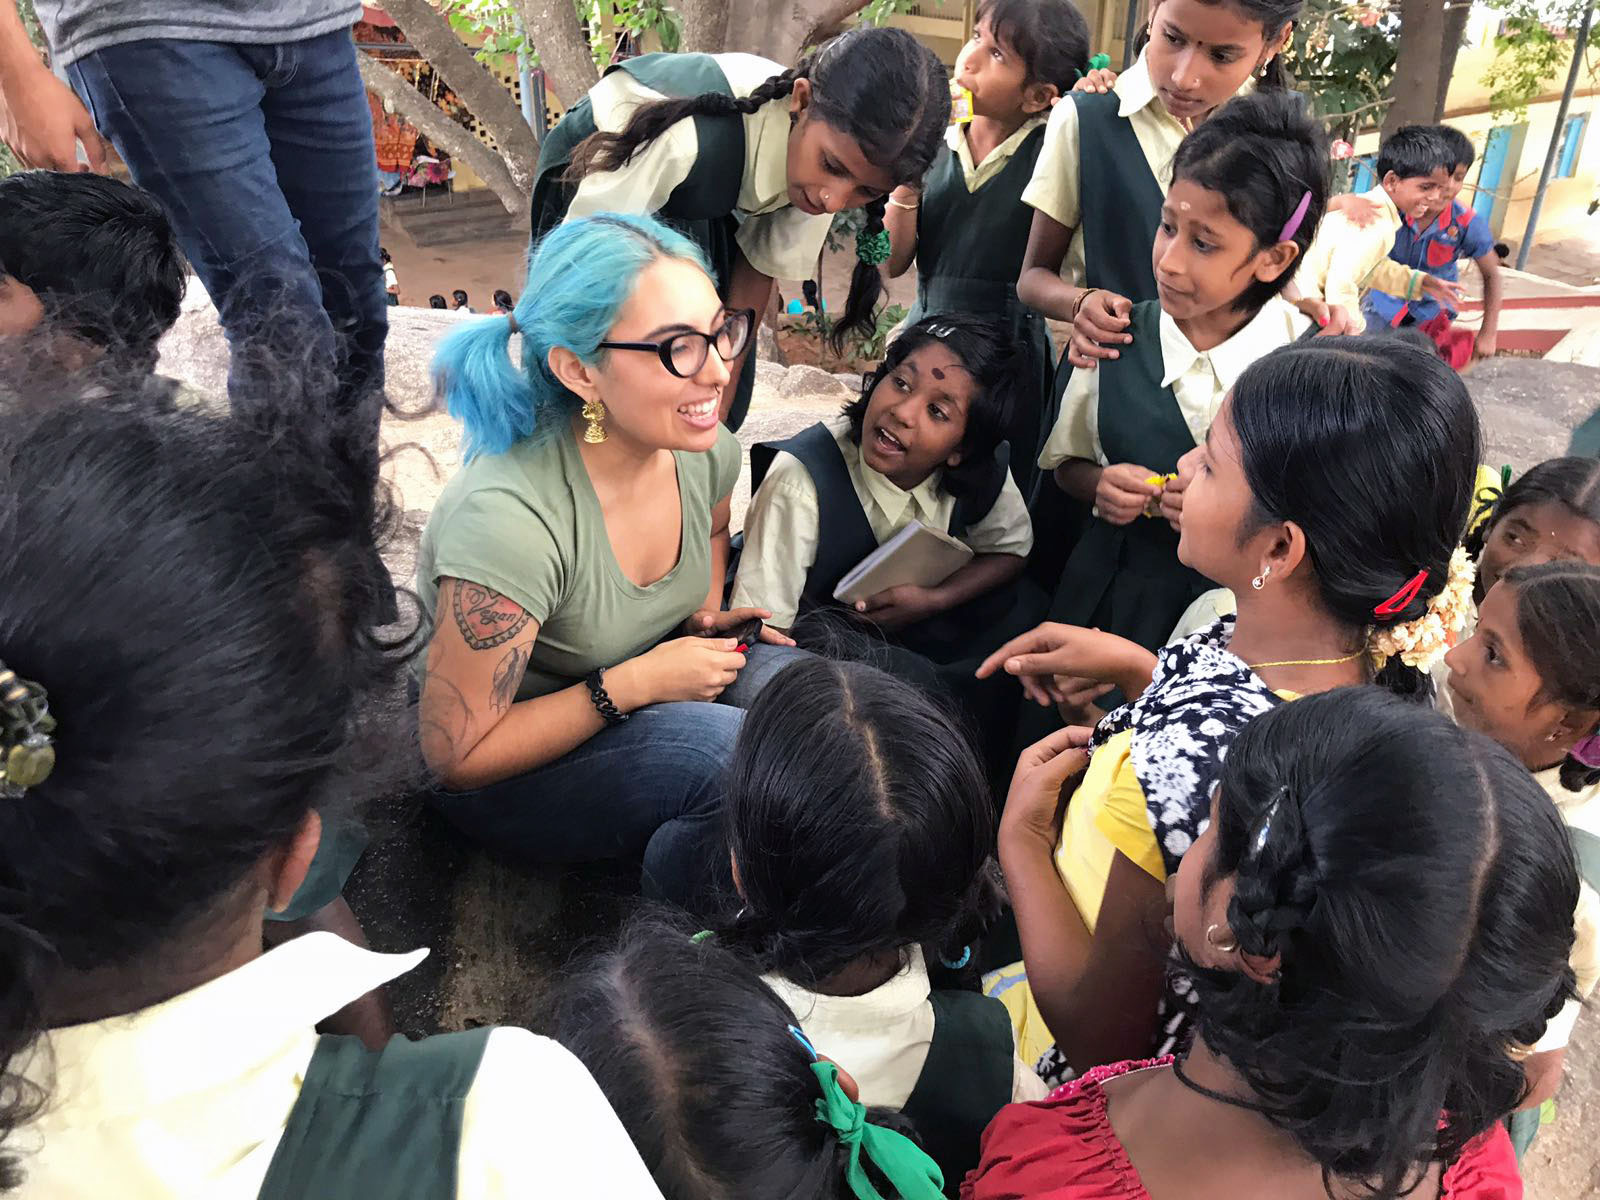 Smiling Cal State LA student sitting on the ground surrounded by listening young school students in India.